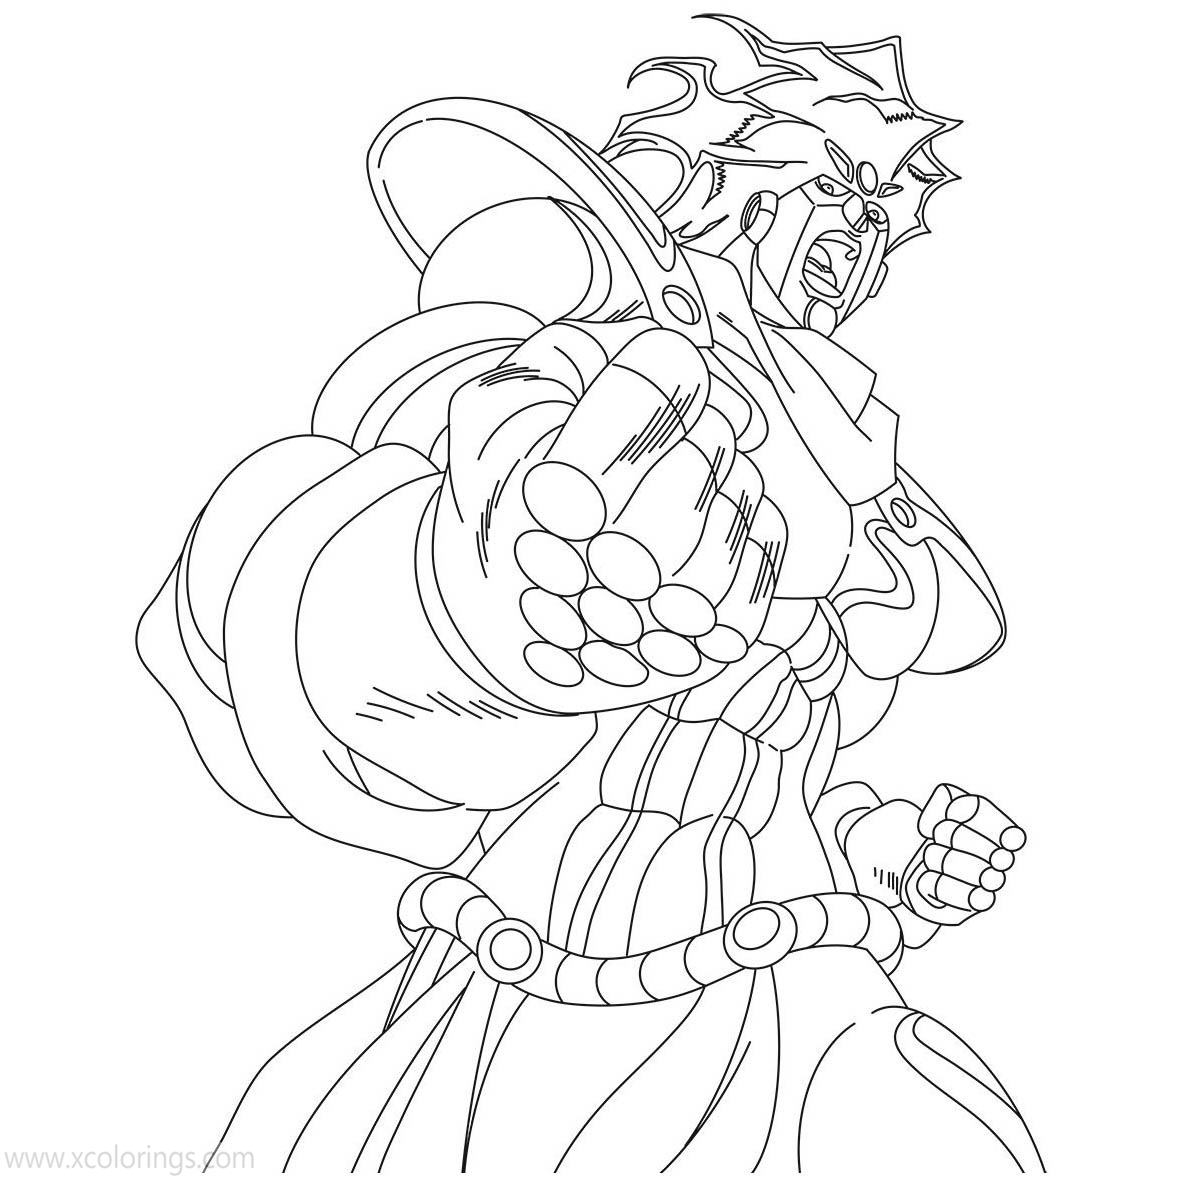 Free JoJo's Bizarre Adventure Coloring Pages Character Star Platinum printable